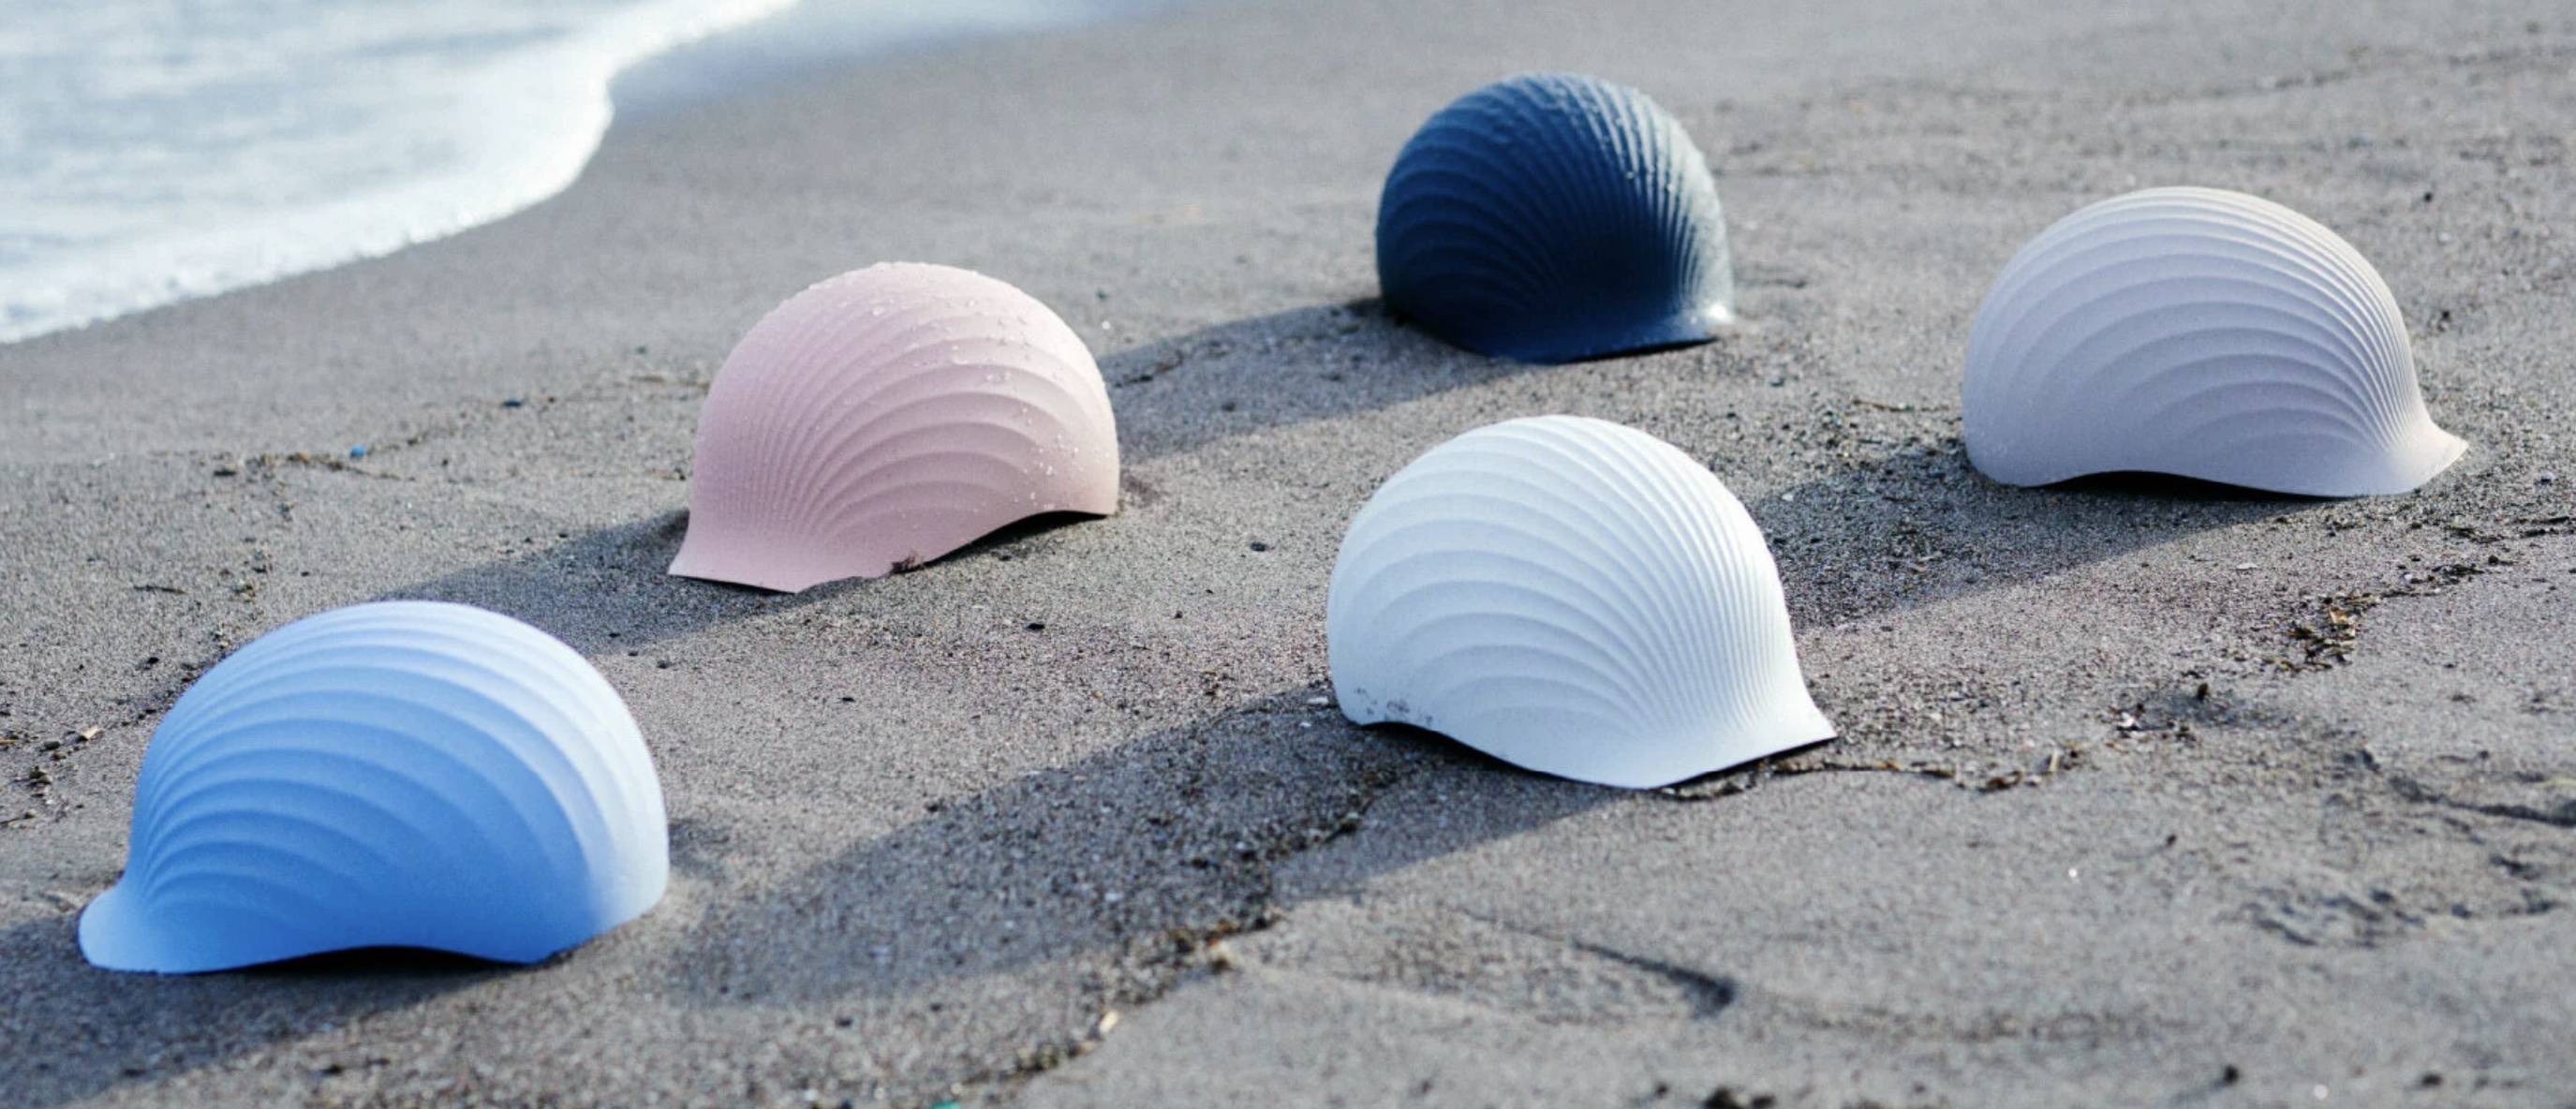 Five hardhats that resemble shells placed on the sand of a beach